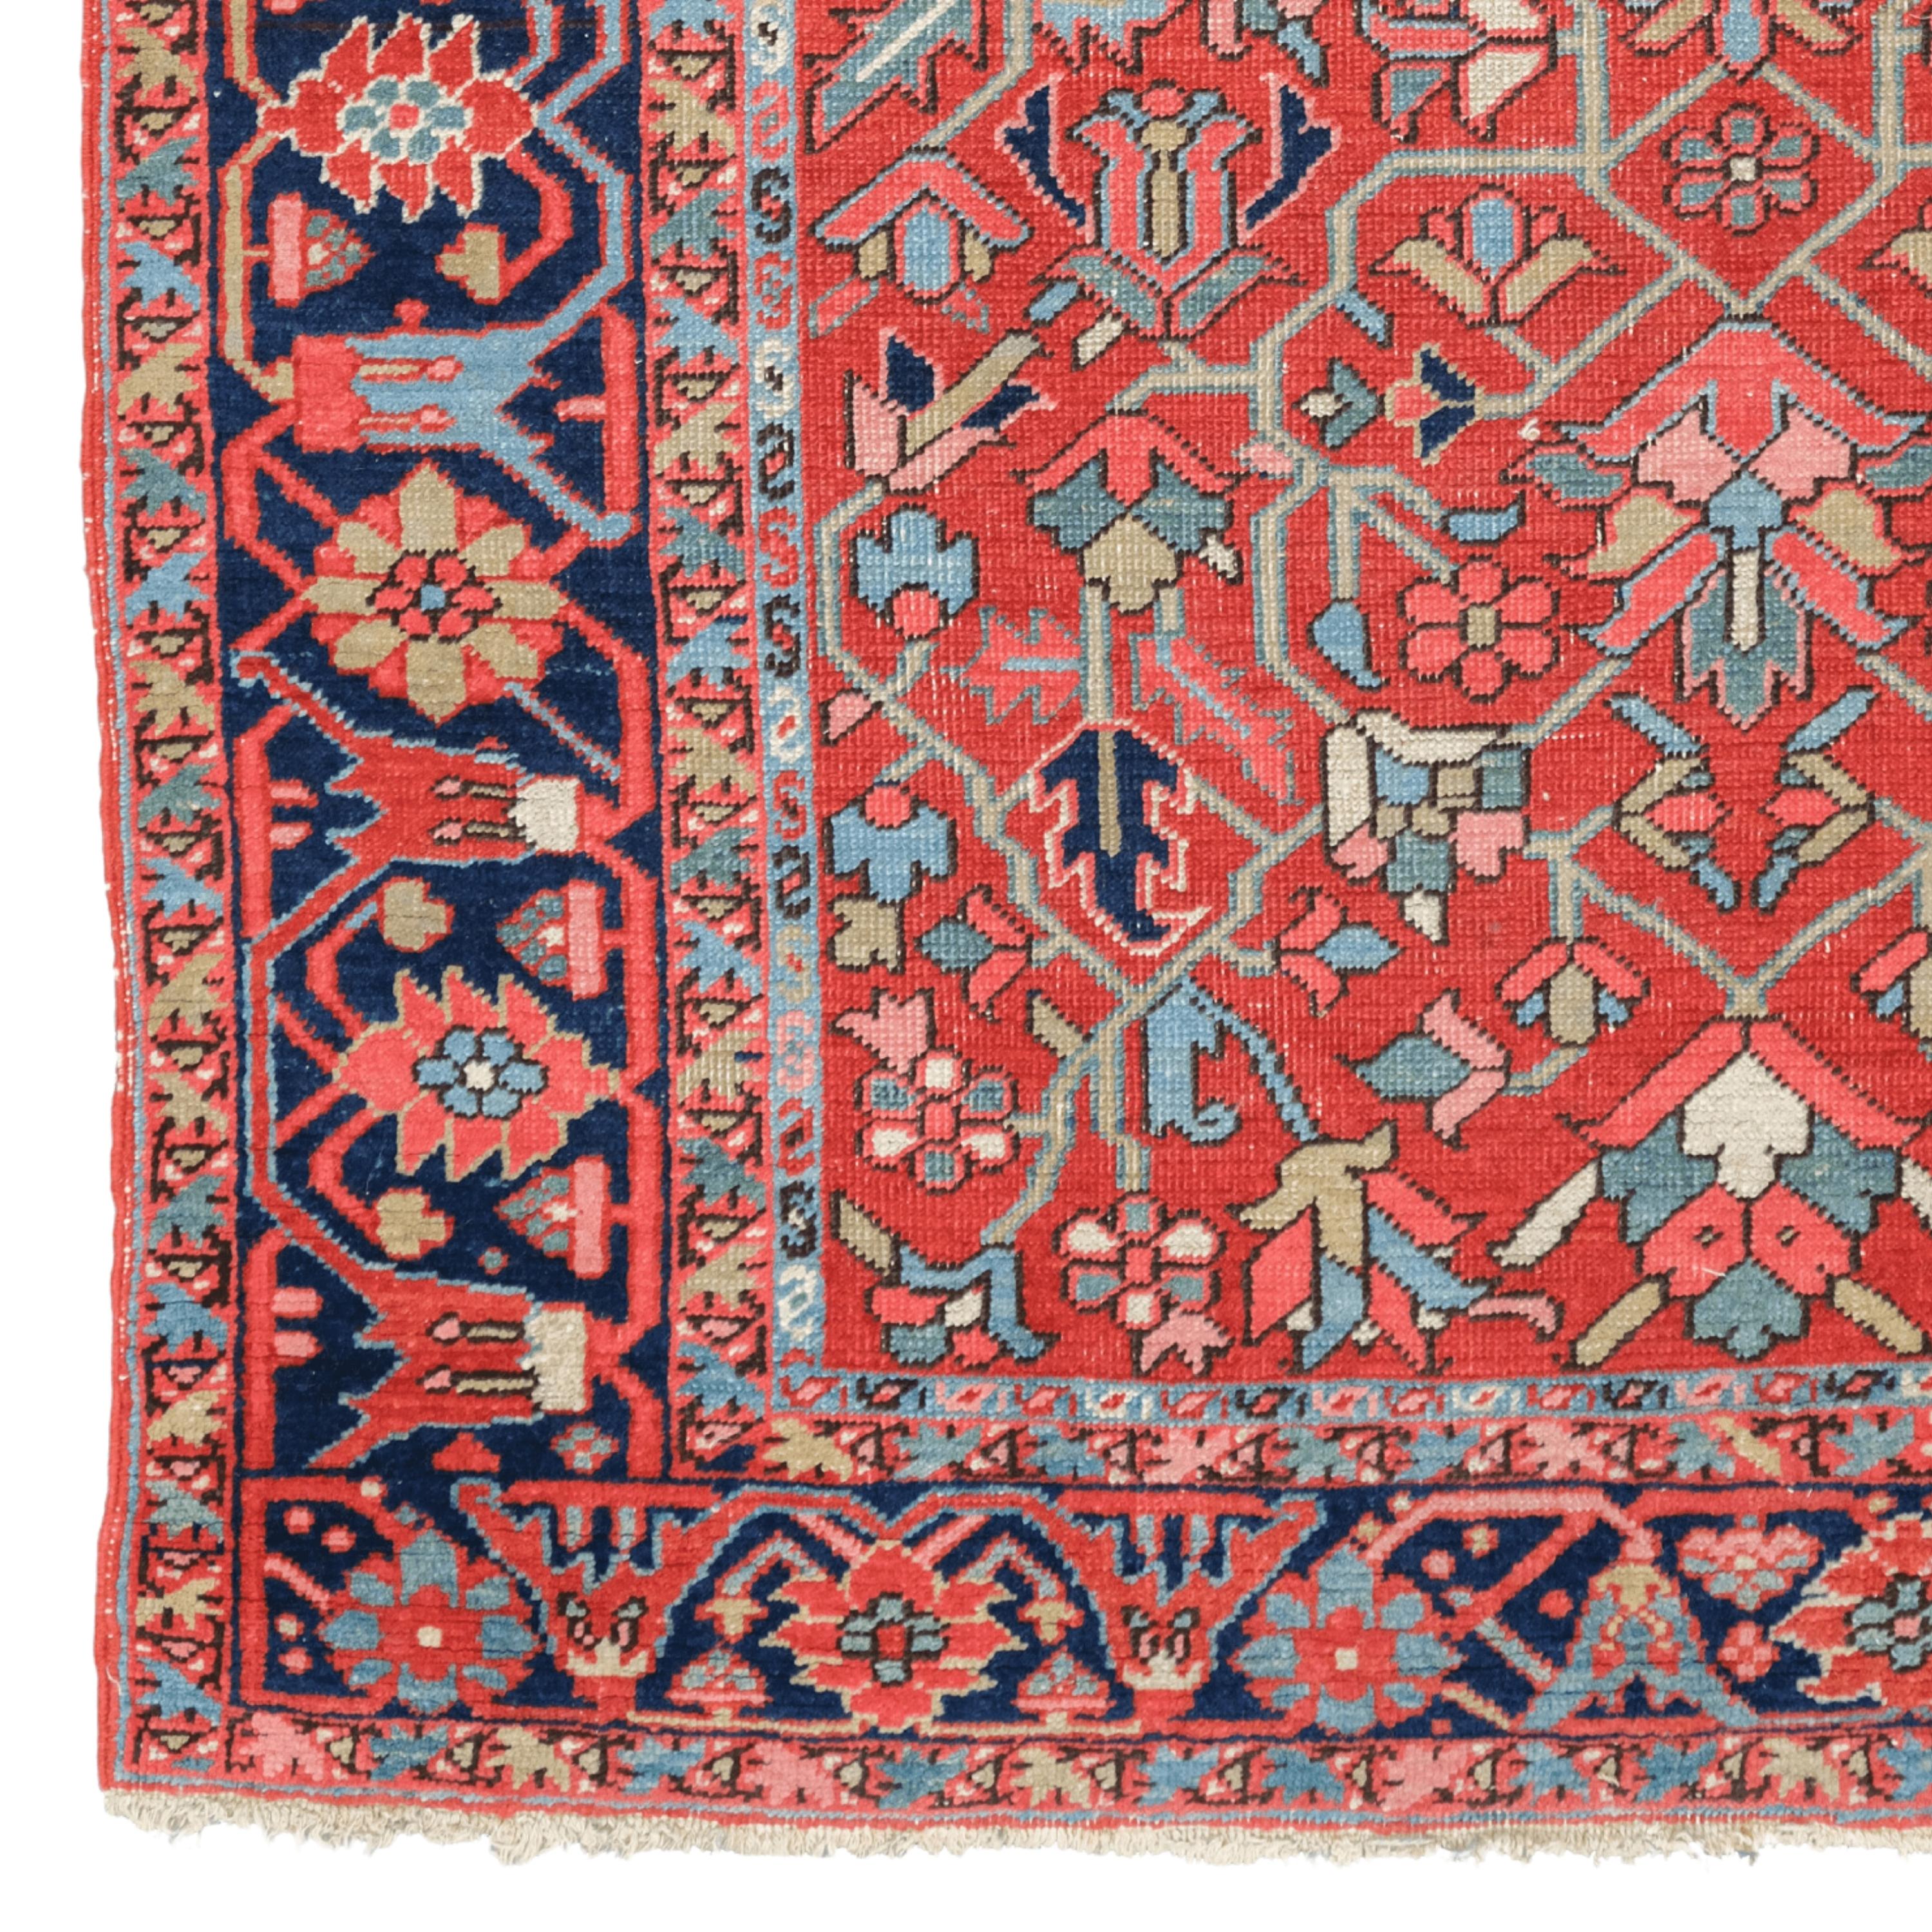 19th Century Room Size Heriz Rug allover design.

This extraordinary carpet will fascinate you with its intricate designs and vibrant colors that reflect the rich history and craftsmanship of the period. Each stitch tells the story of skilled